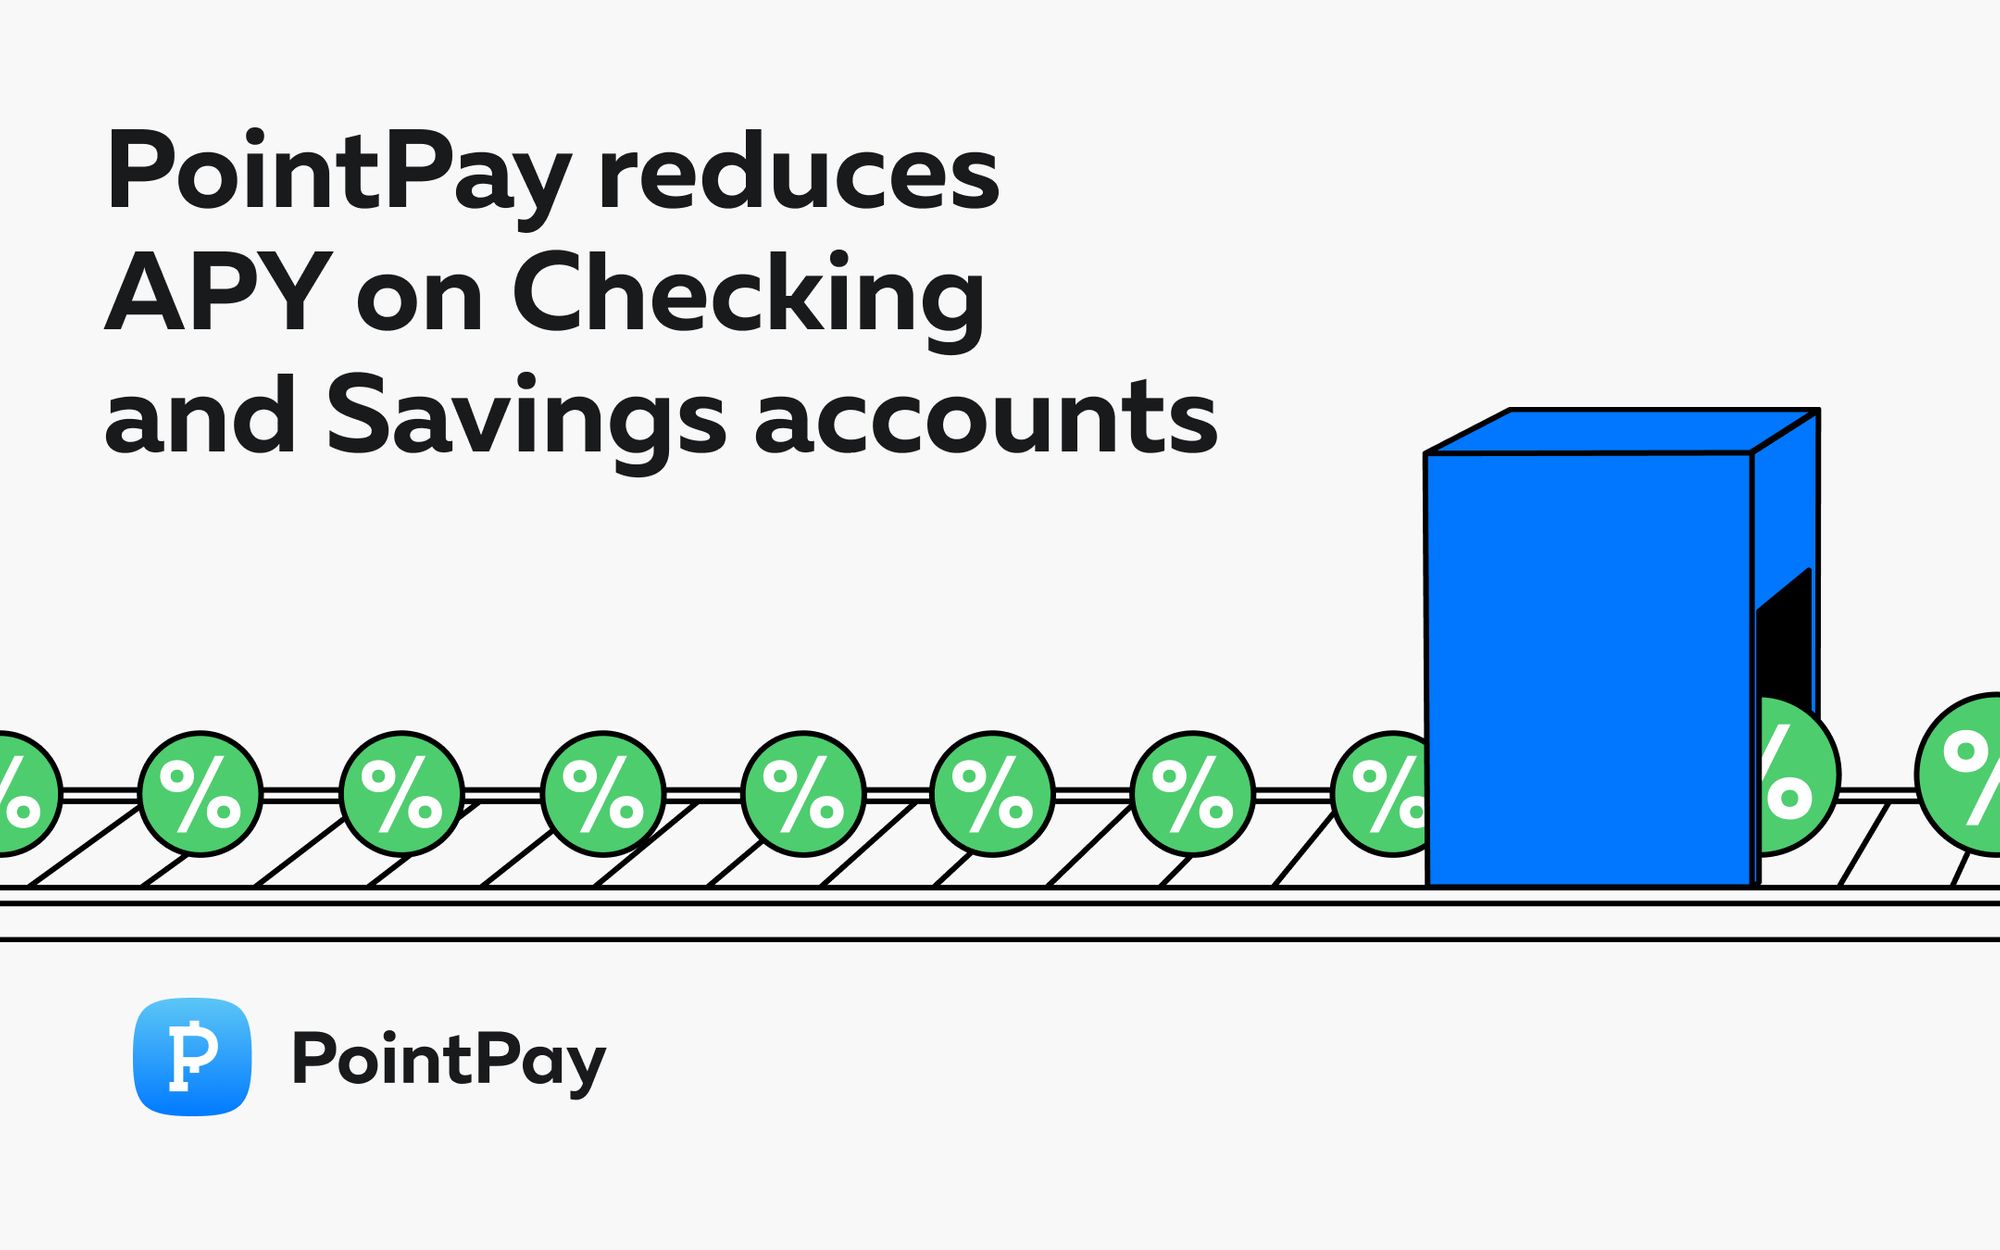 PointPay reduces APY on Checking and Savings accounts